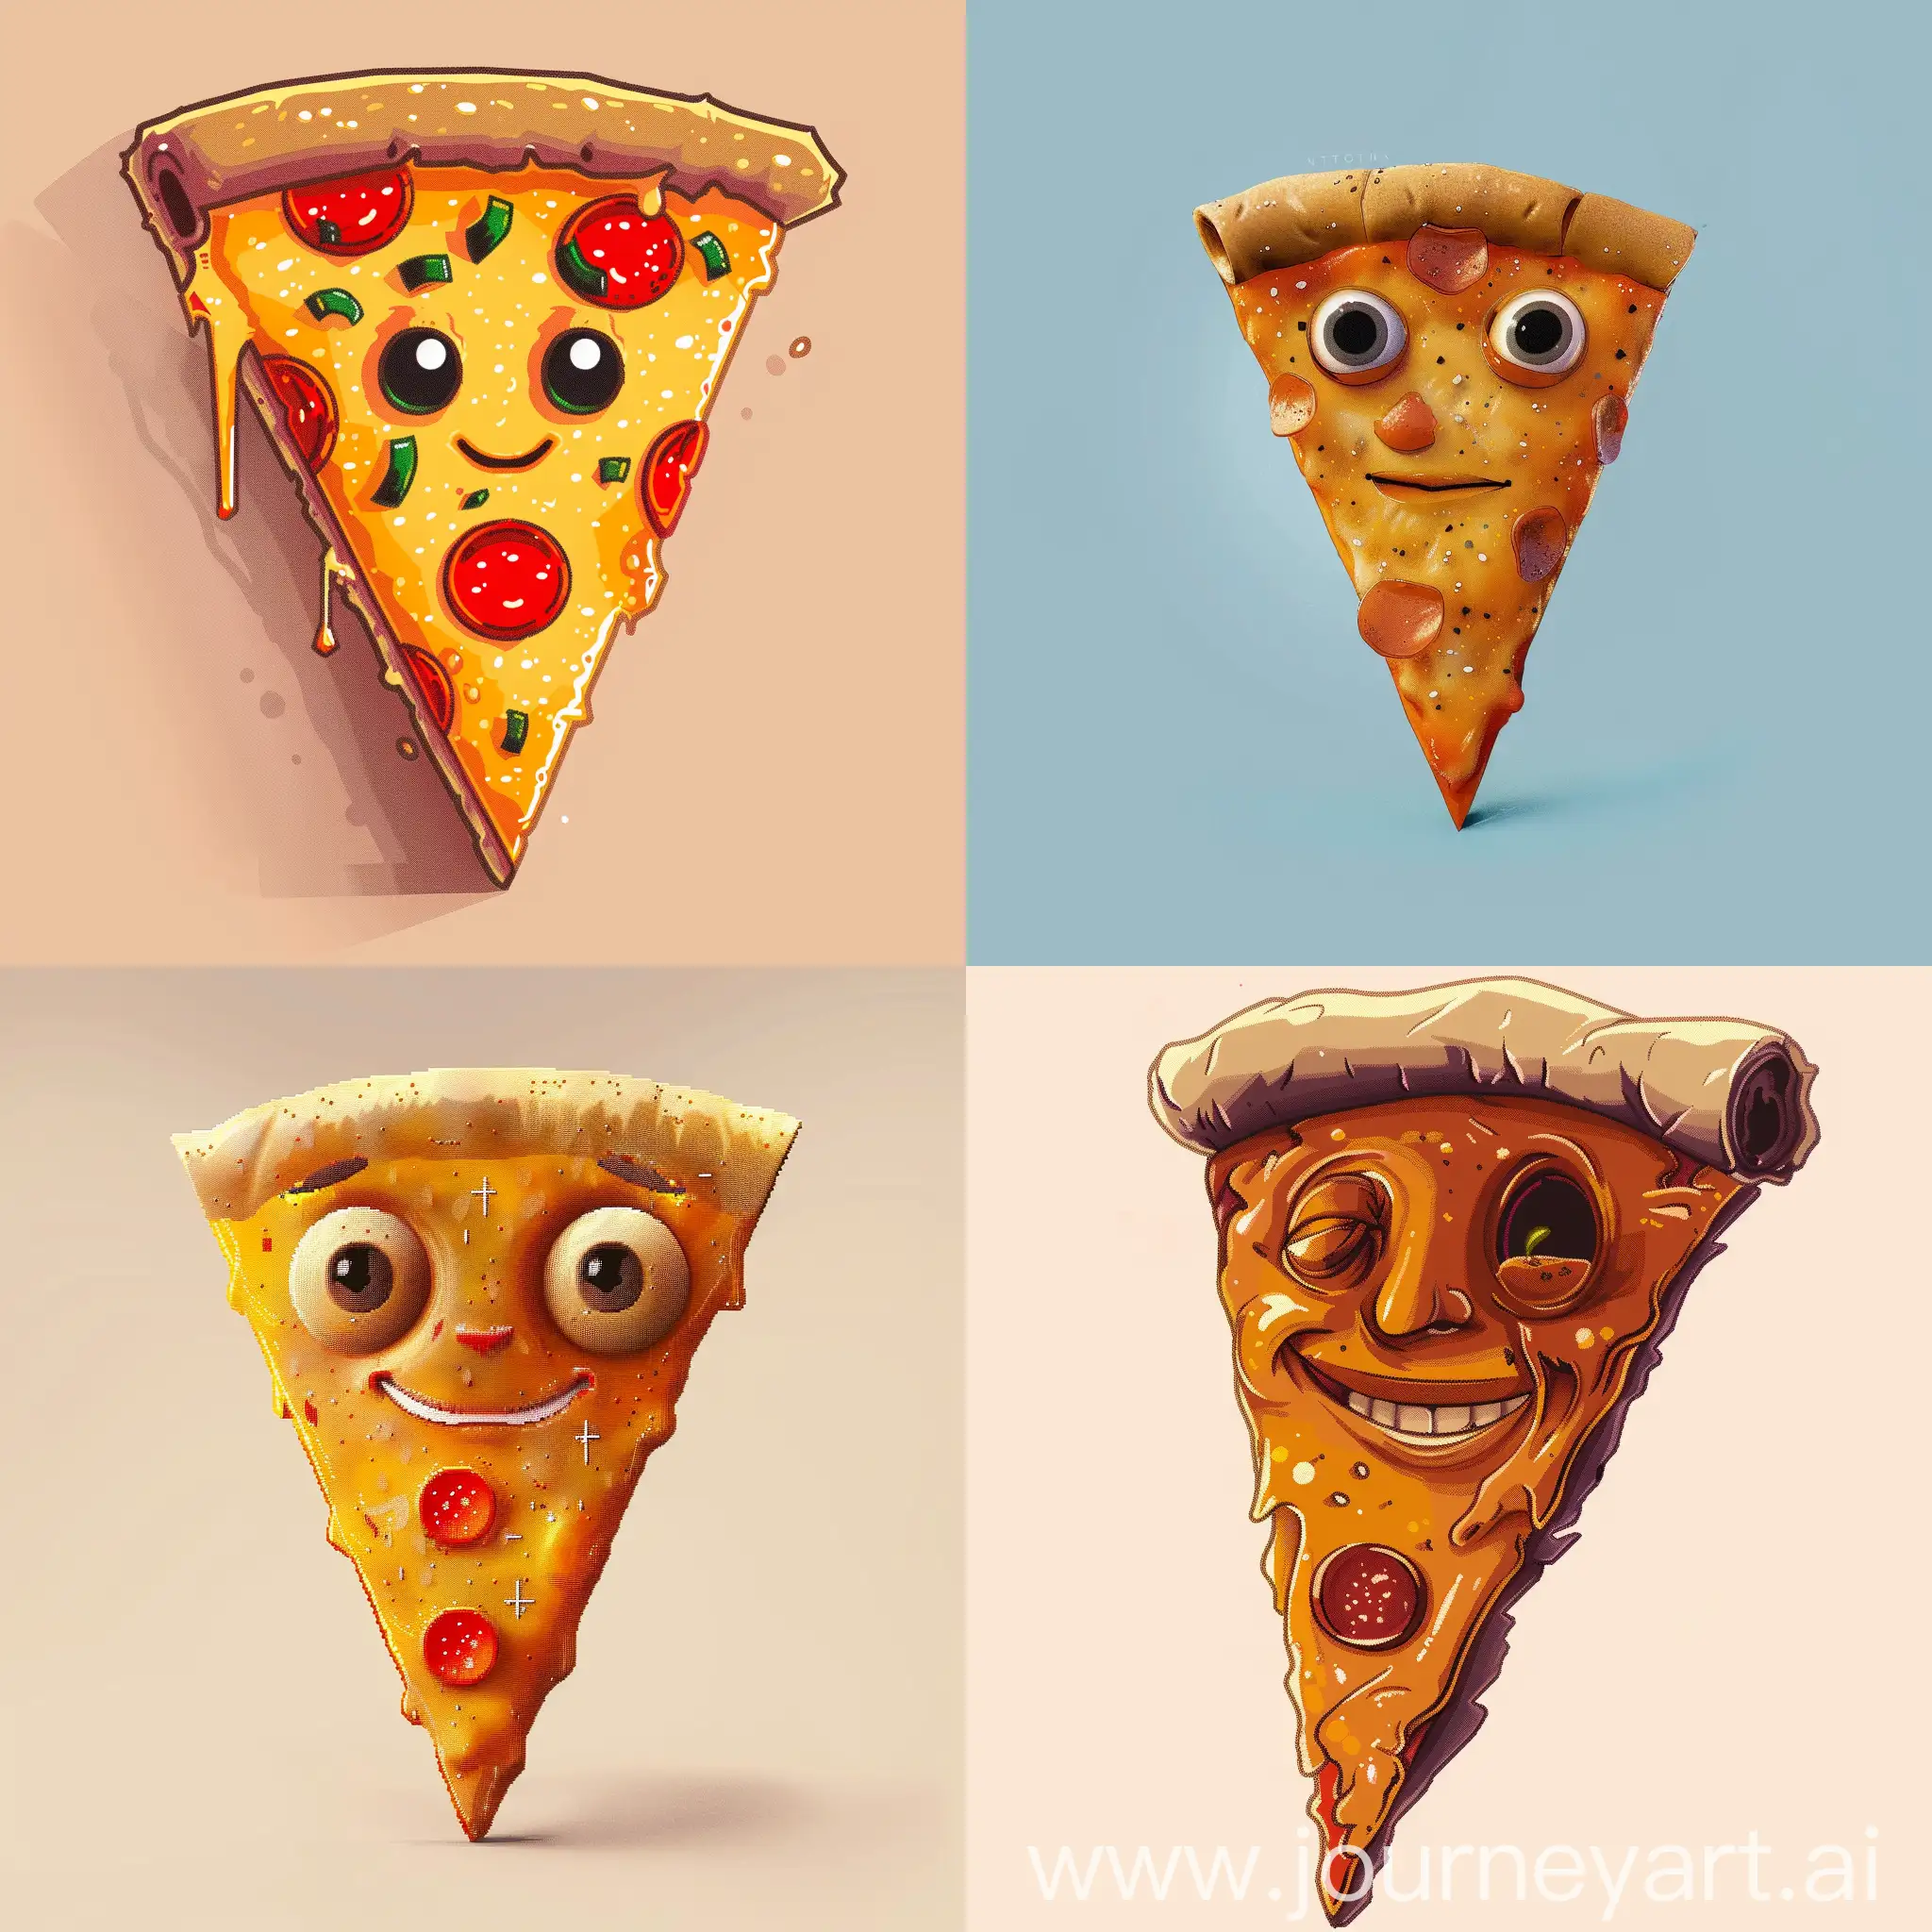 Pizza slice with a face, profile picture, nft art, pixelart 32 x 32 pixel, peperoni